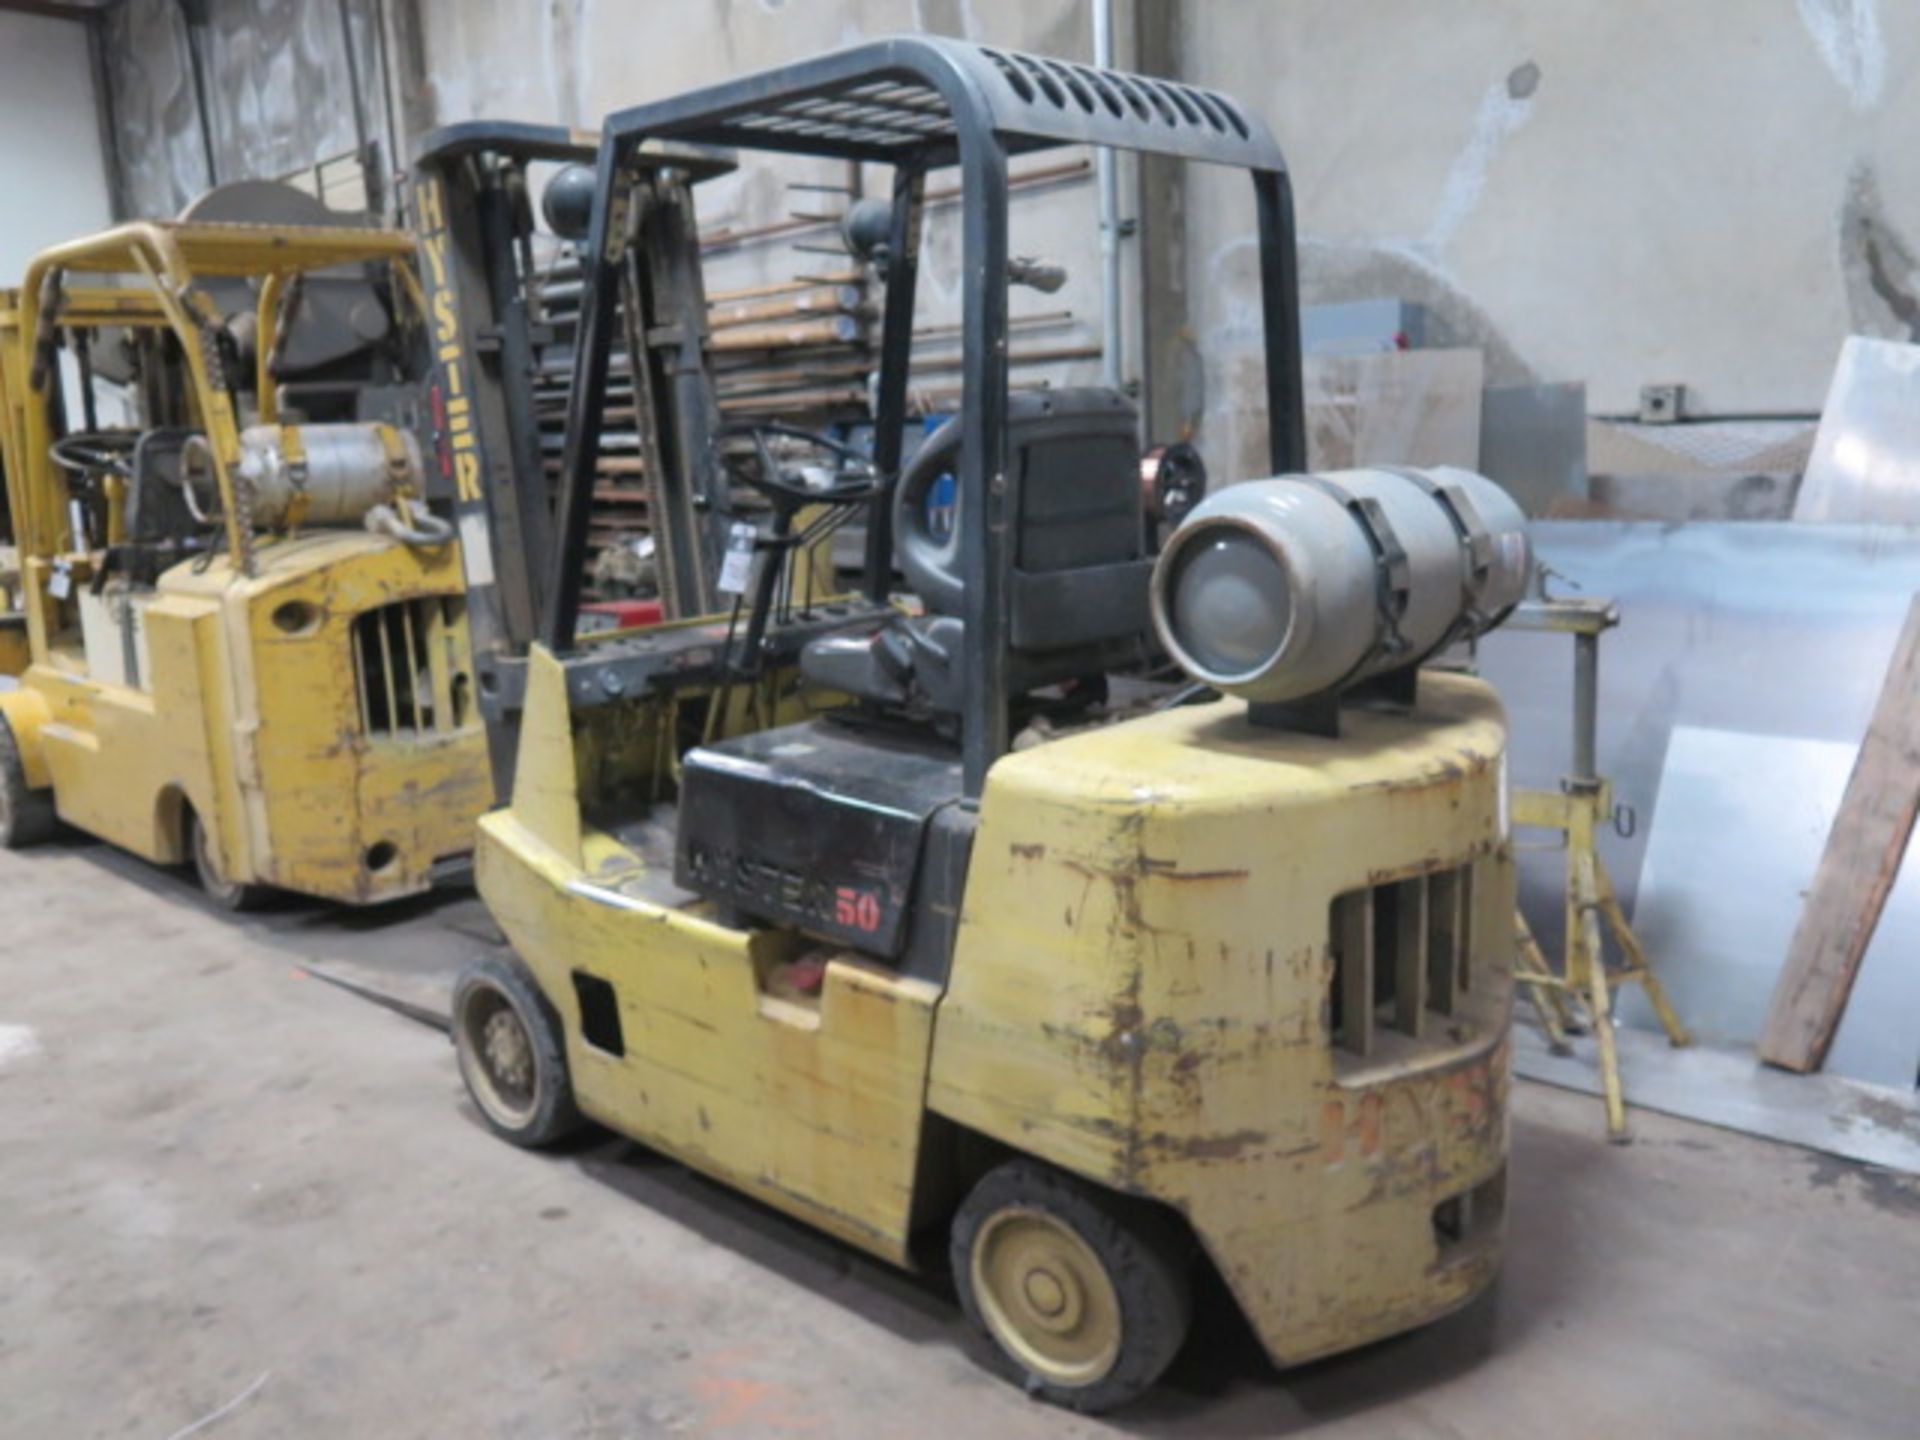 Hyster 50 5000 Lb Cap LPG Forklift w/ 2-Stage Mast, Cushion Tires (SOLD AS-IS - NO WARRANTY) - Image 2 of 10